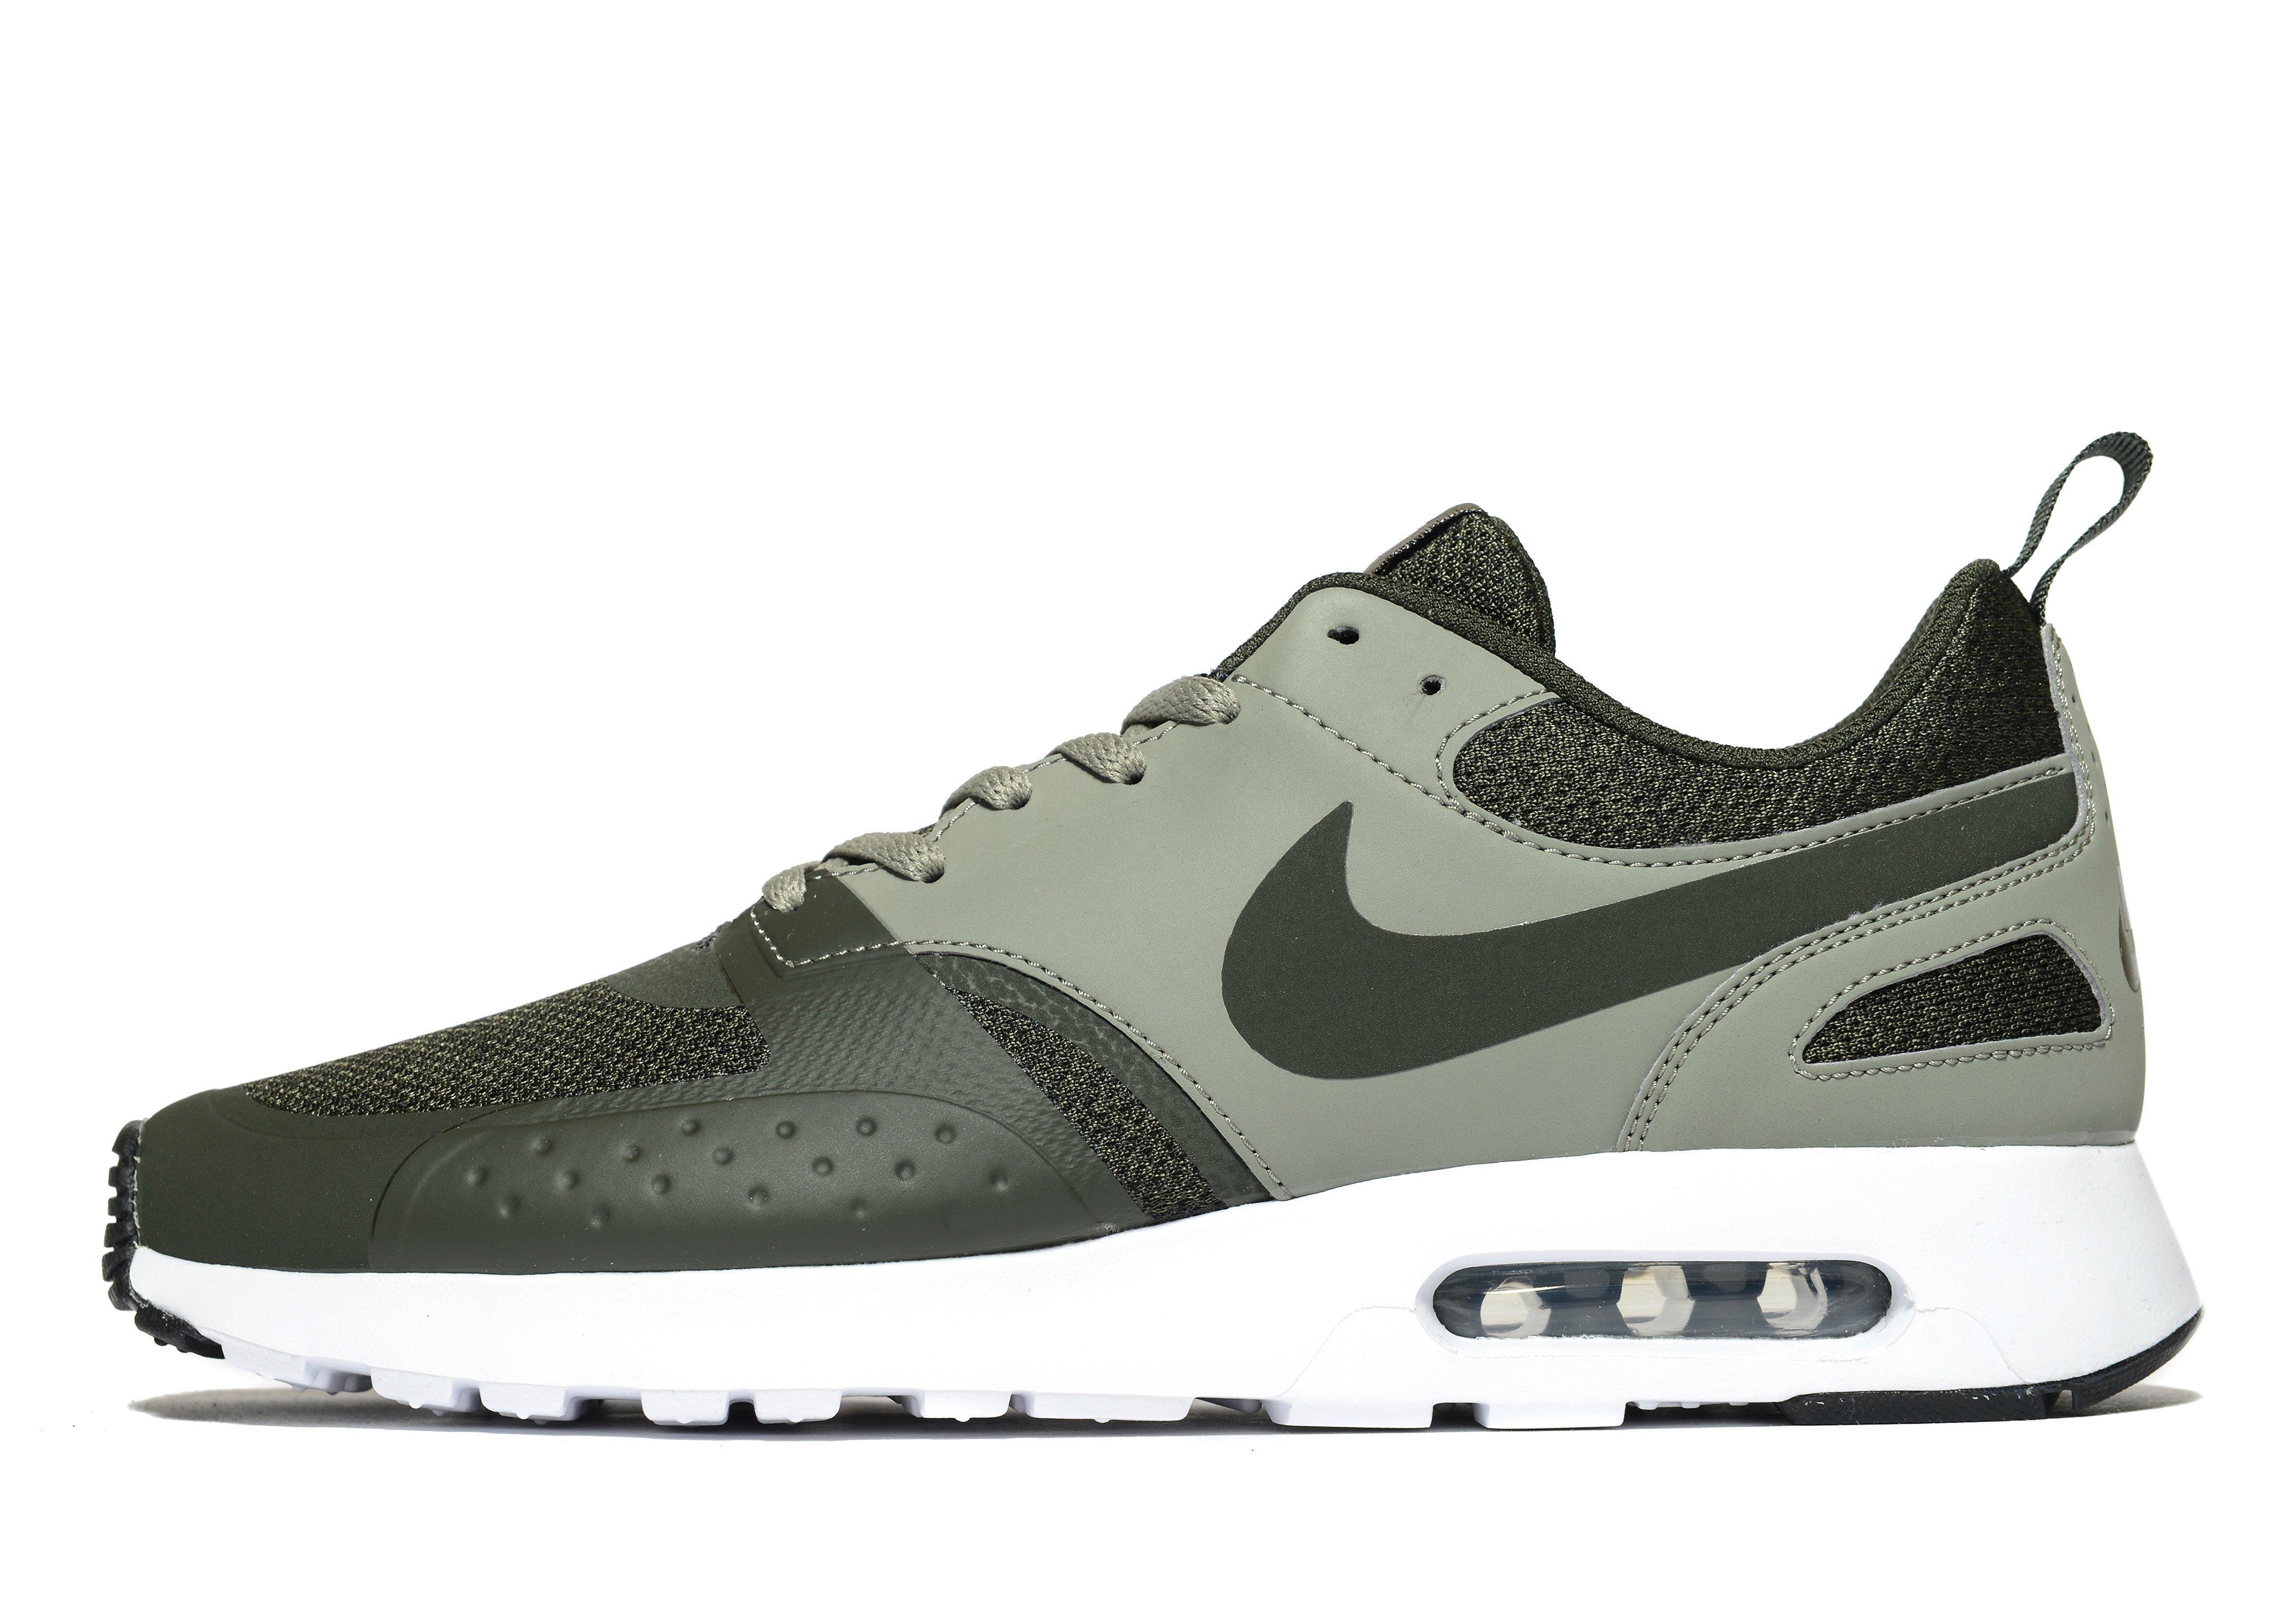 Nike Synthetic Air Max Vision in Olive 